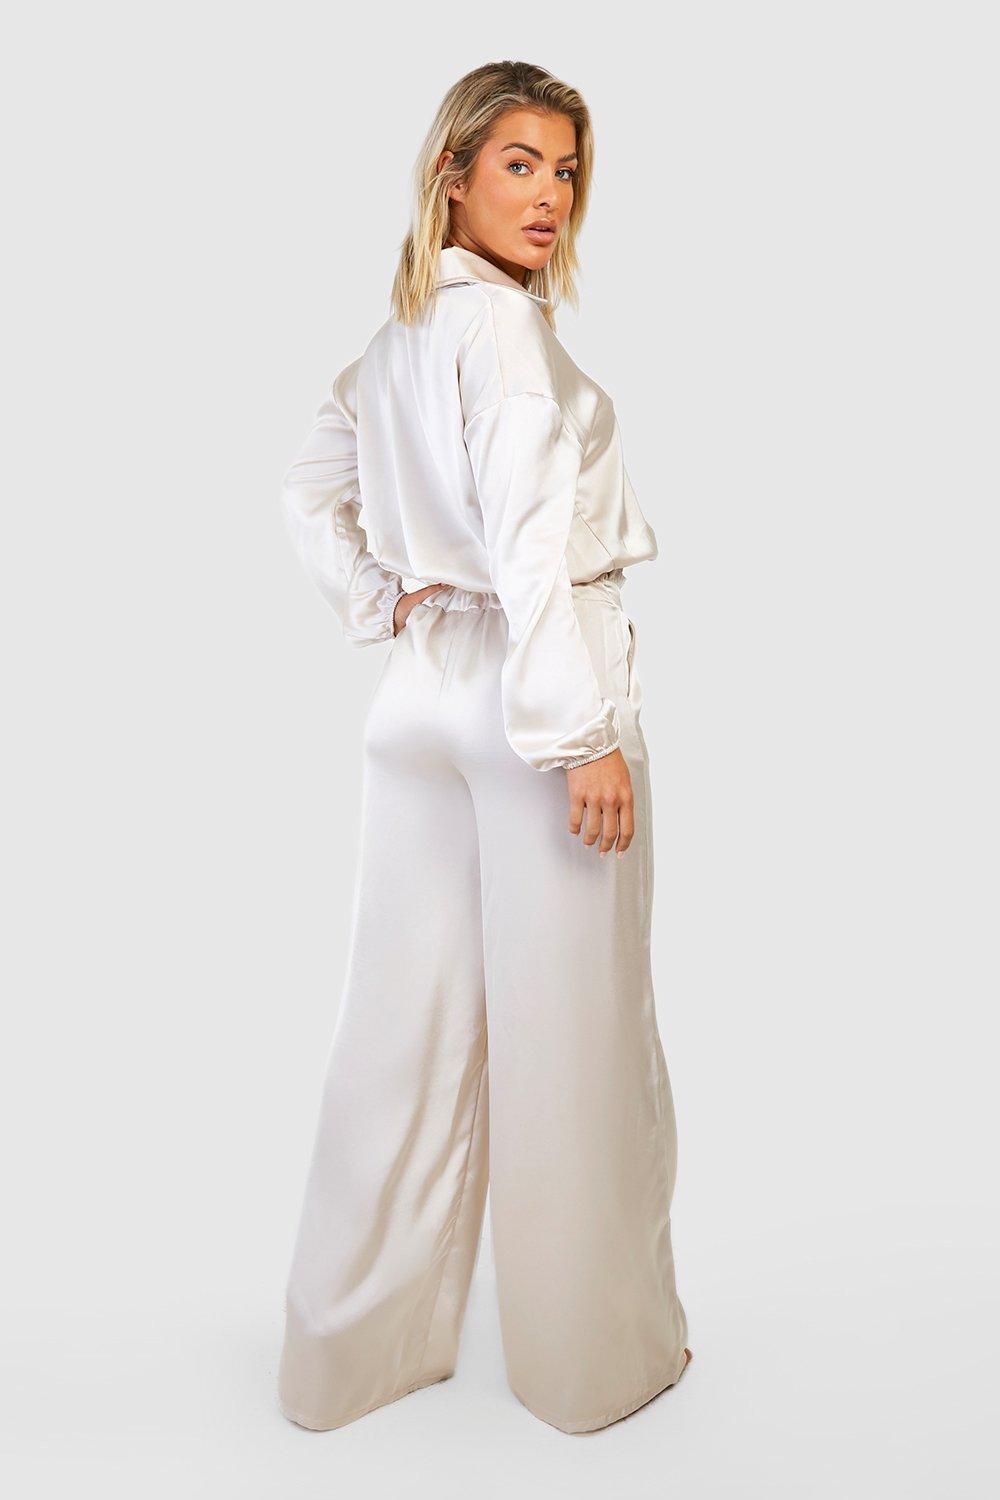 Only Petite oversized satin blazer and palazzo trouser co-ord in champagne